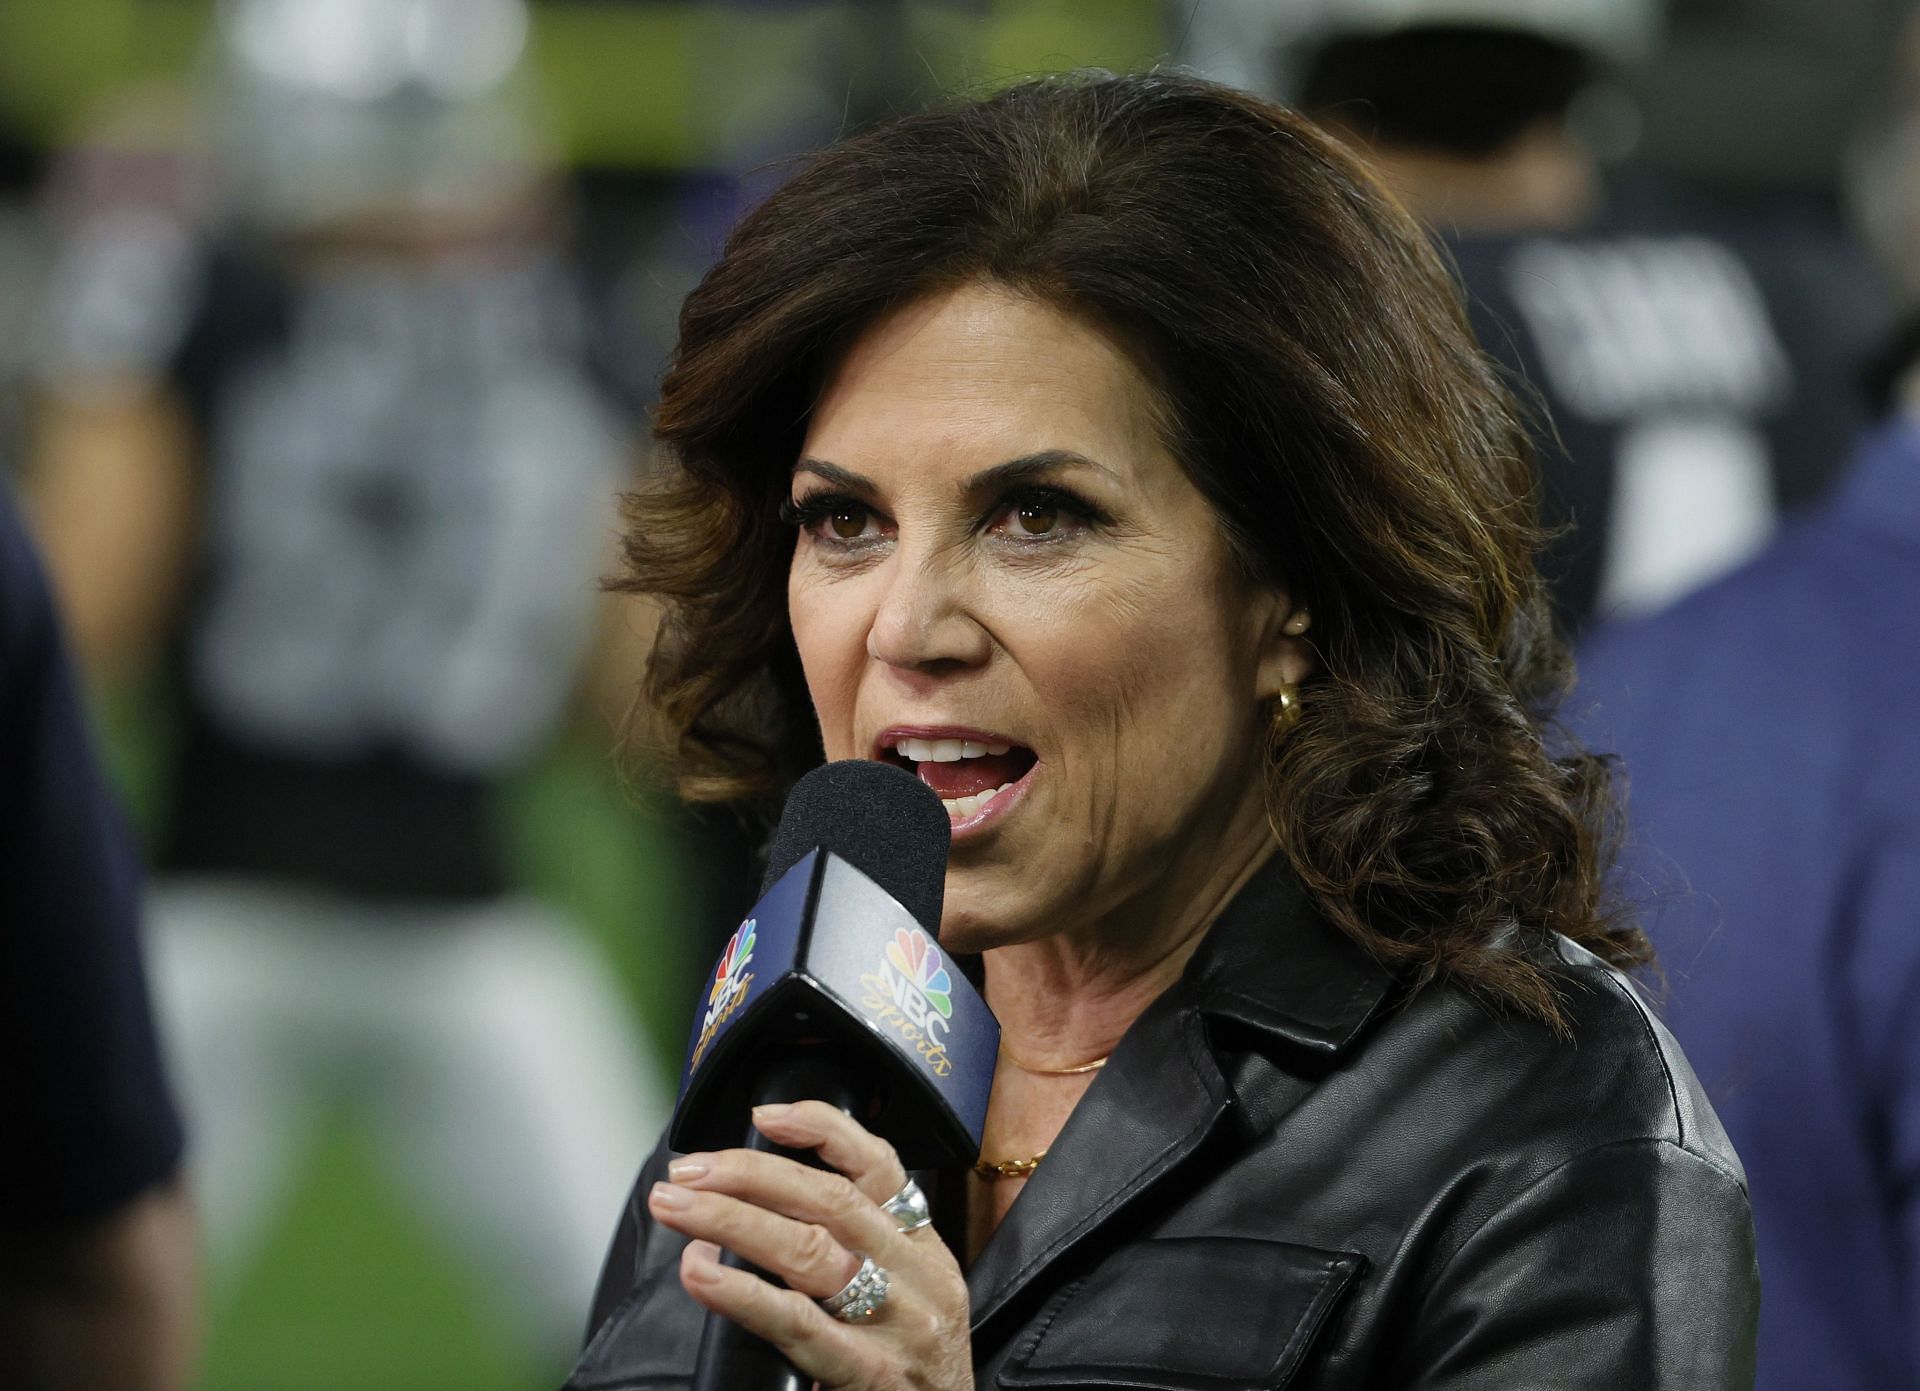 The former sideline reporter has caused quite a stir with her comments